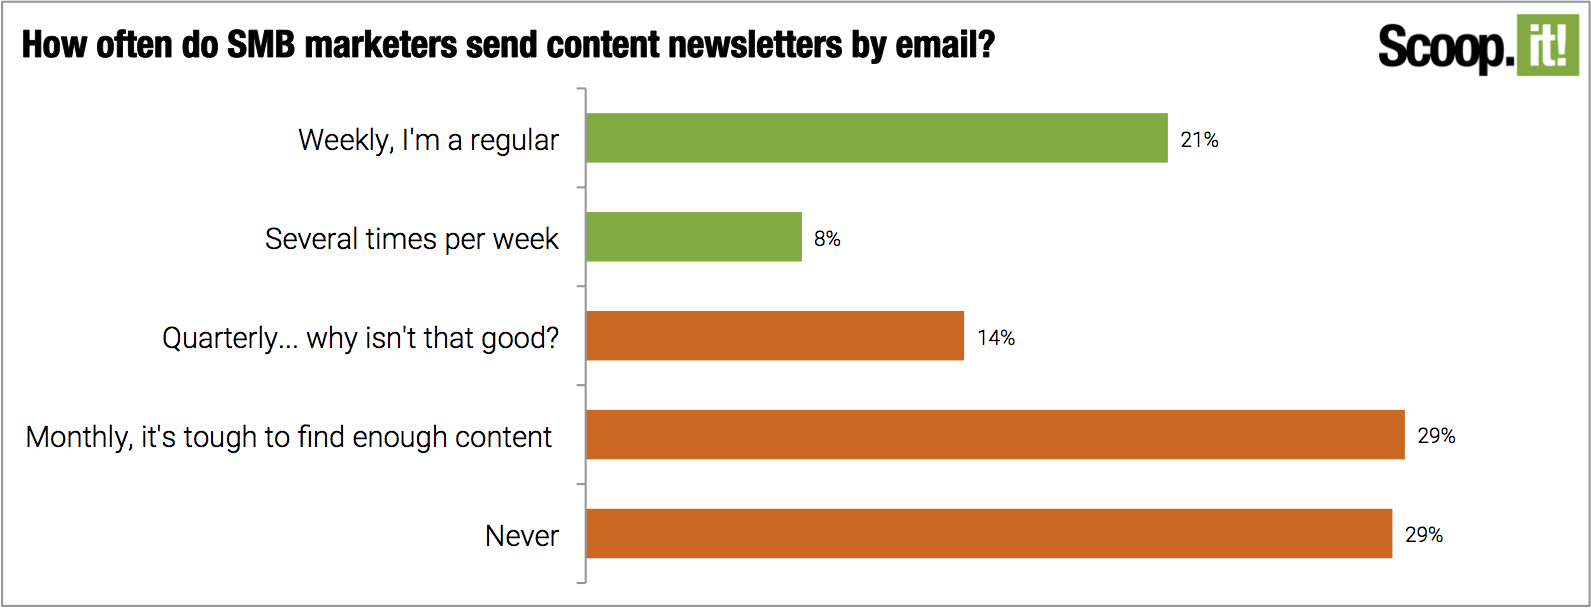 How often do SMB marketers send content newsletters by email